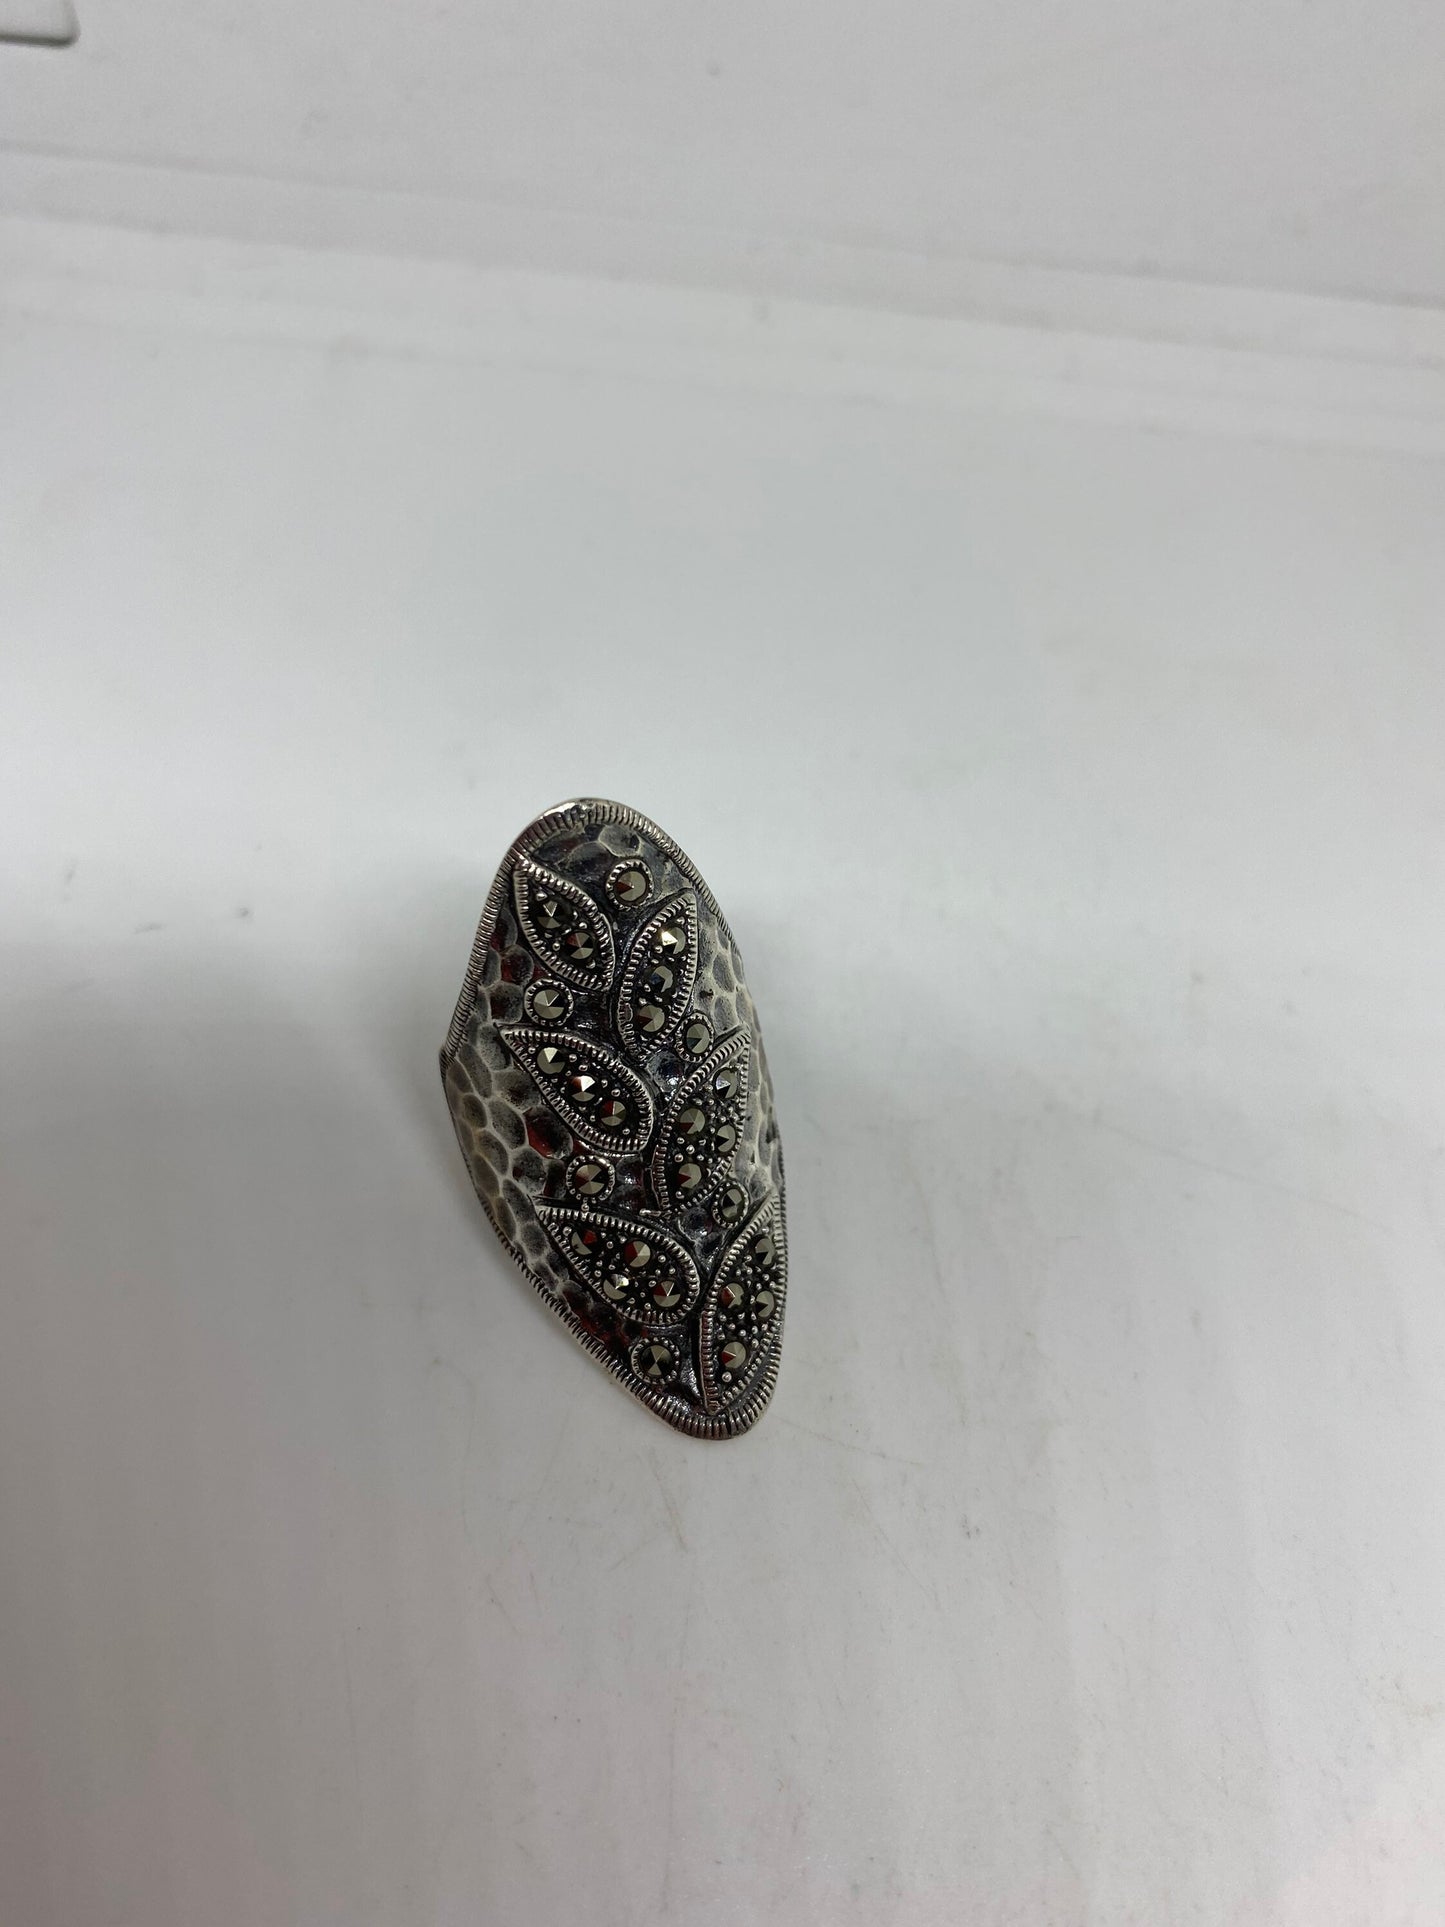 Vintage Swiss Marcasite 925 Sterling Silver Gothic Band Ring Size 8